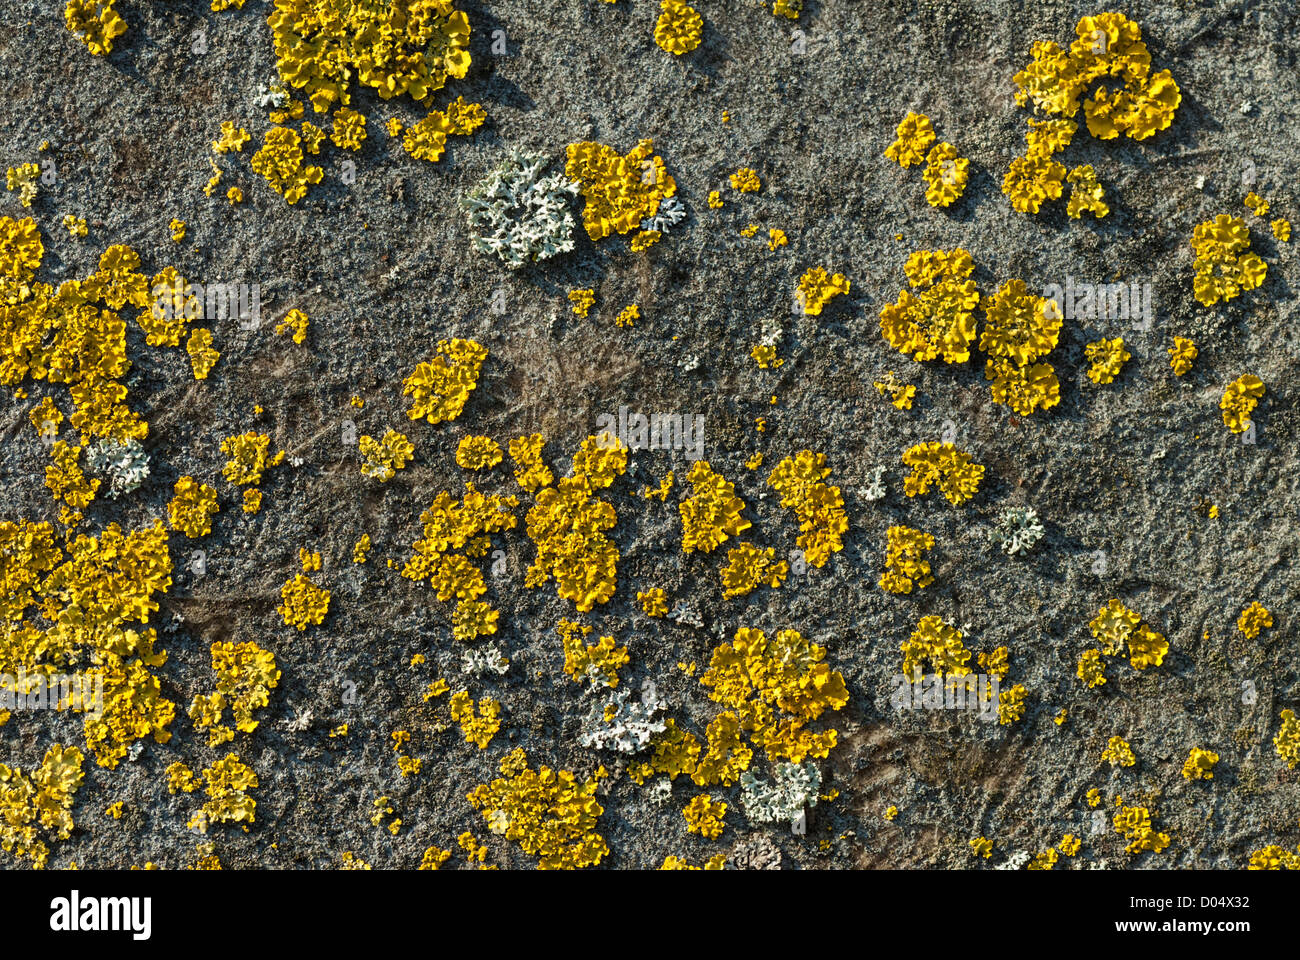 Lichens including bright yellow Xanthoria aureola growing on an asphalt roof in Cardiff. Stock Photo